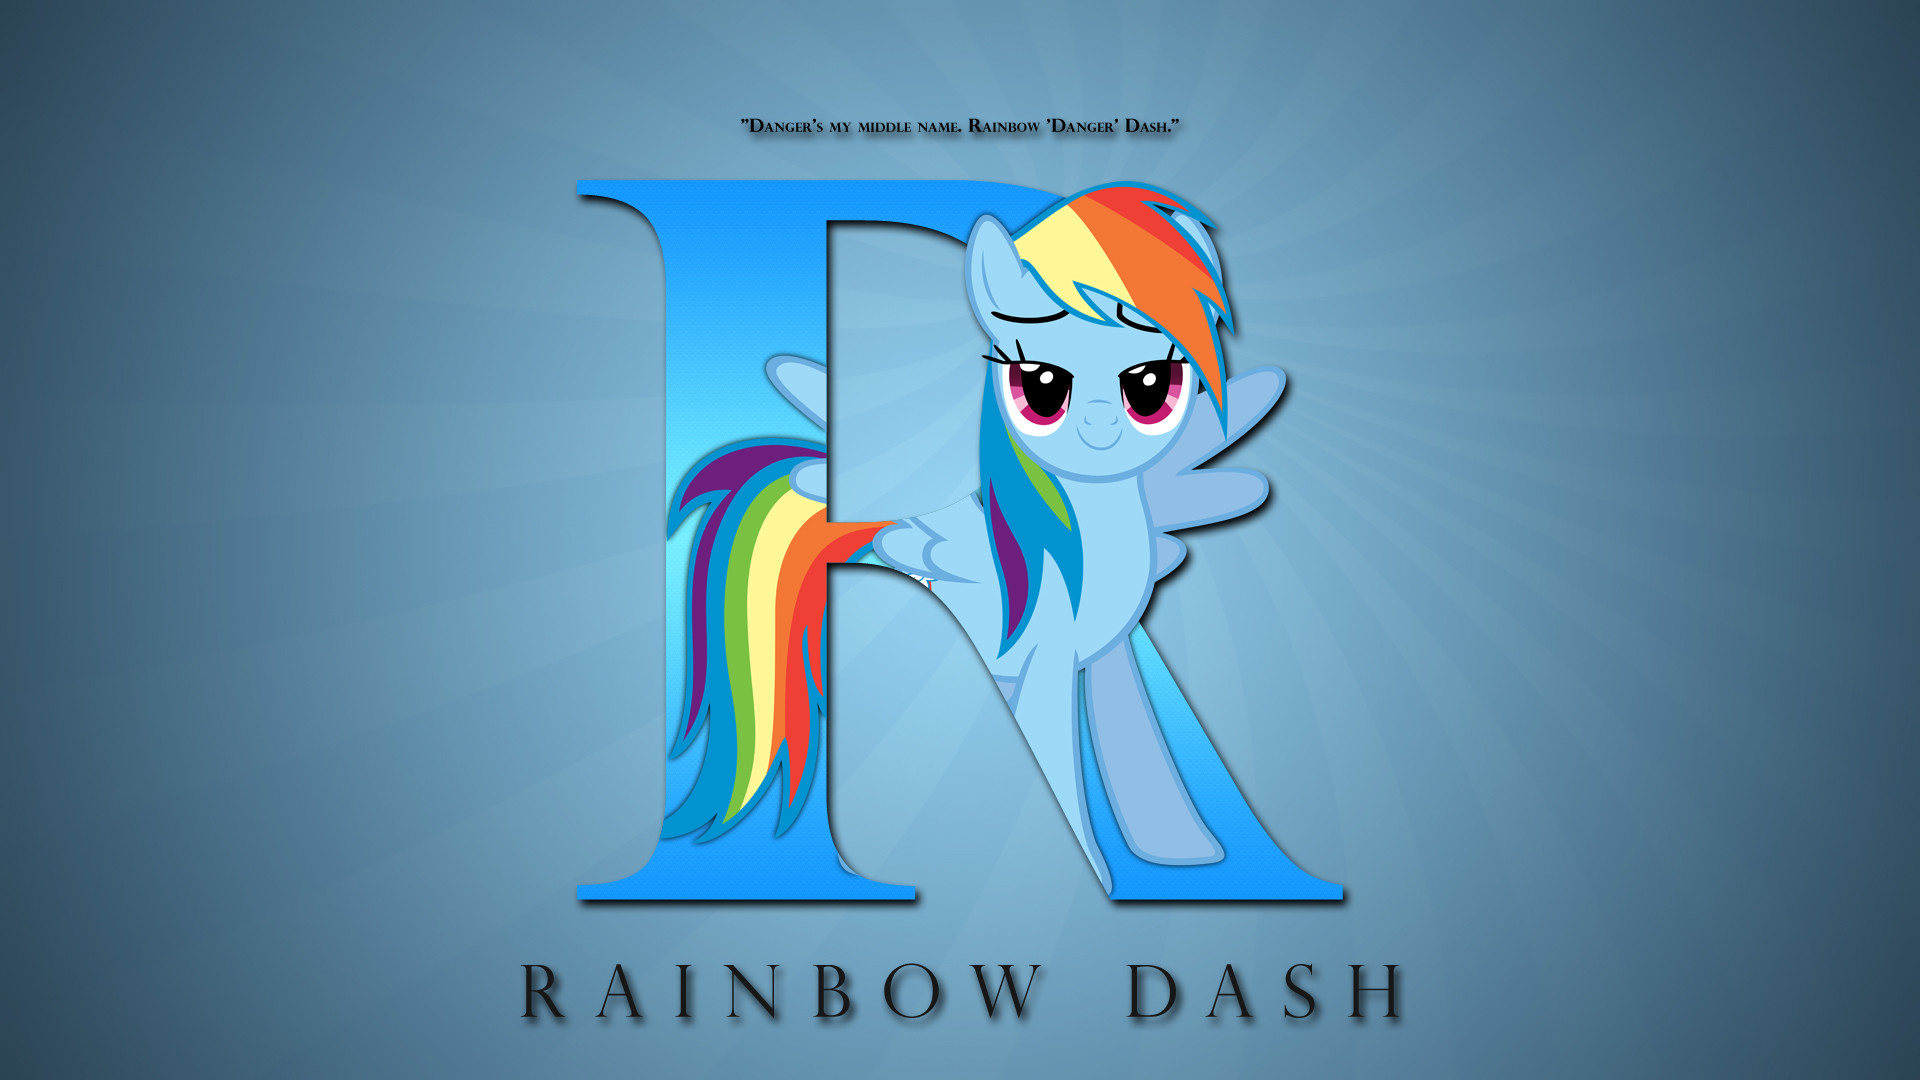 1920x1080 PenguinsN1Fan 8 0 Wallpaper : Letters - Rainbow Dash by pims1978